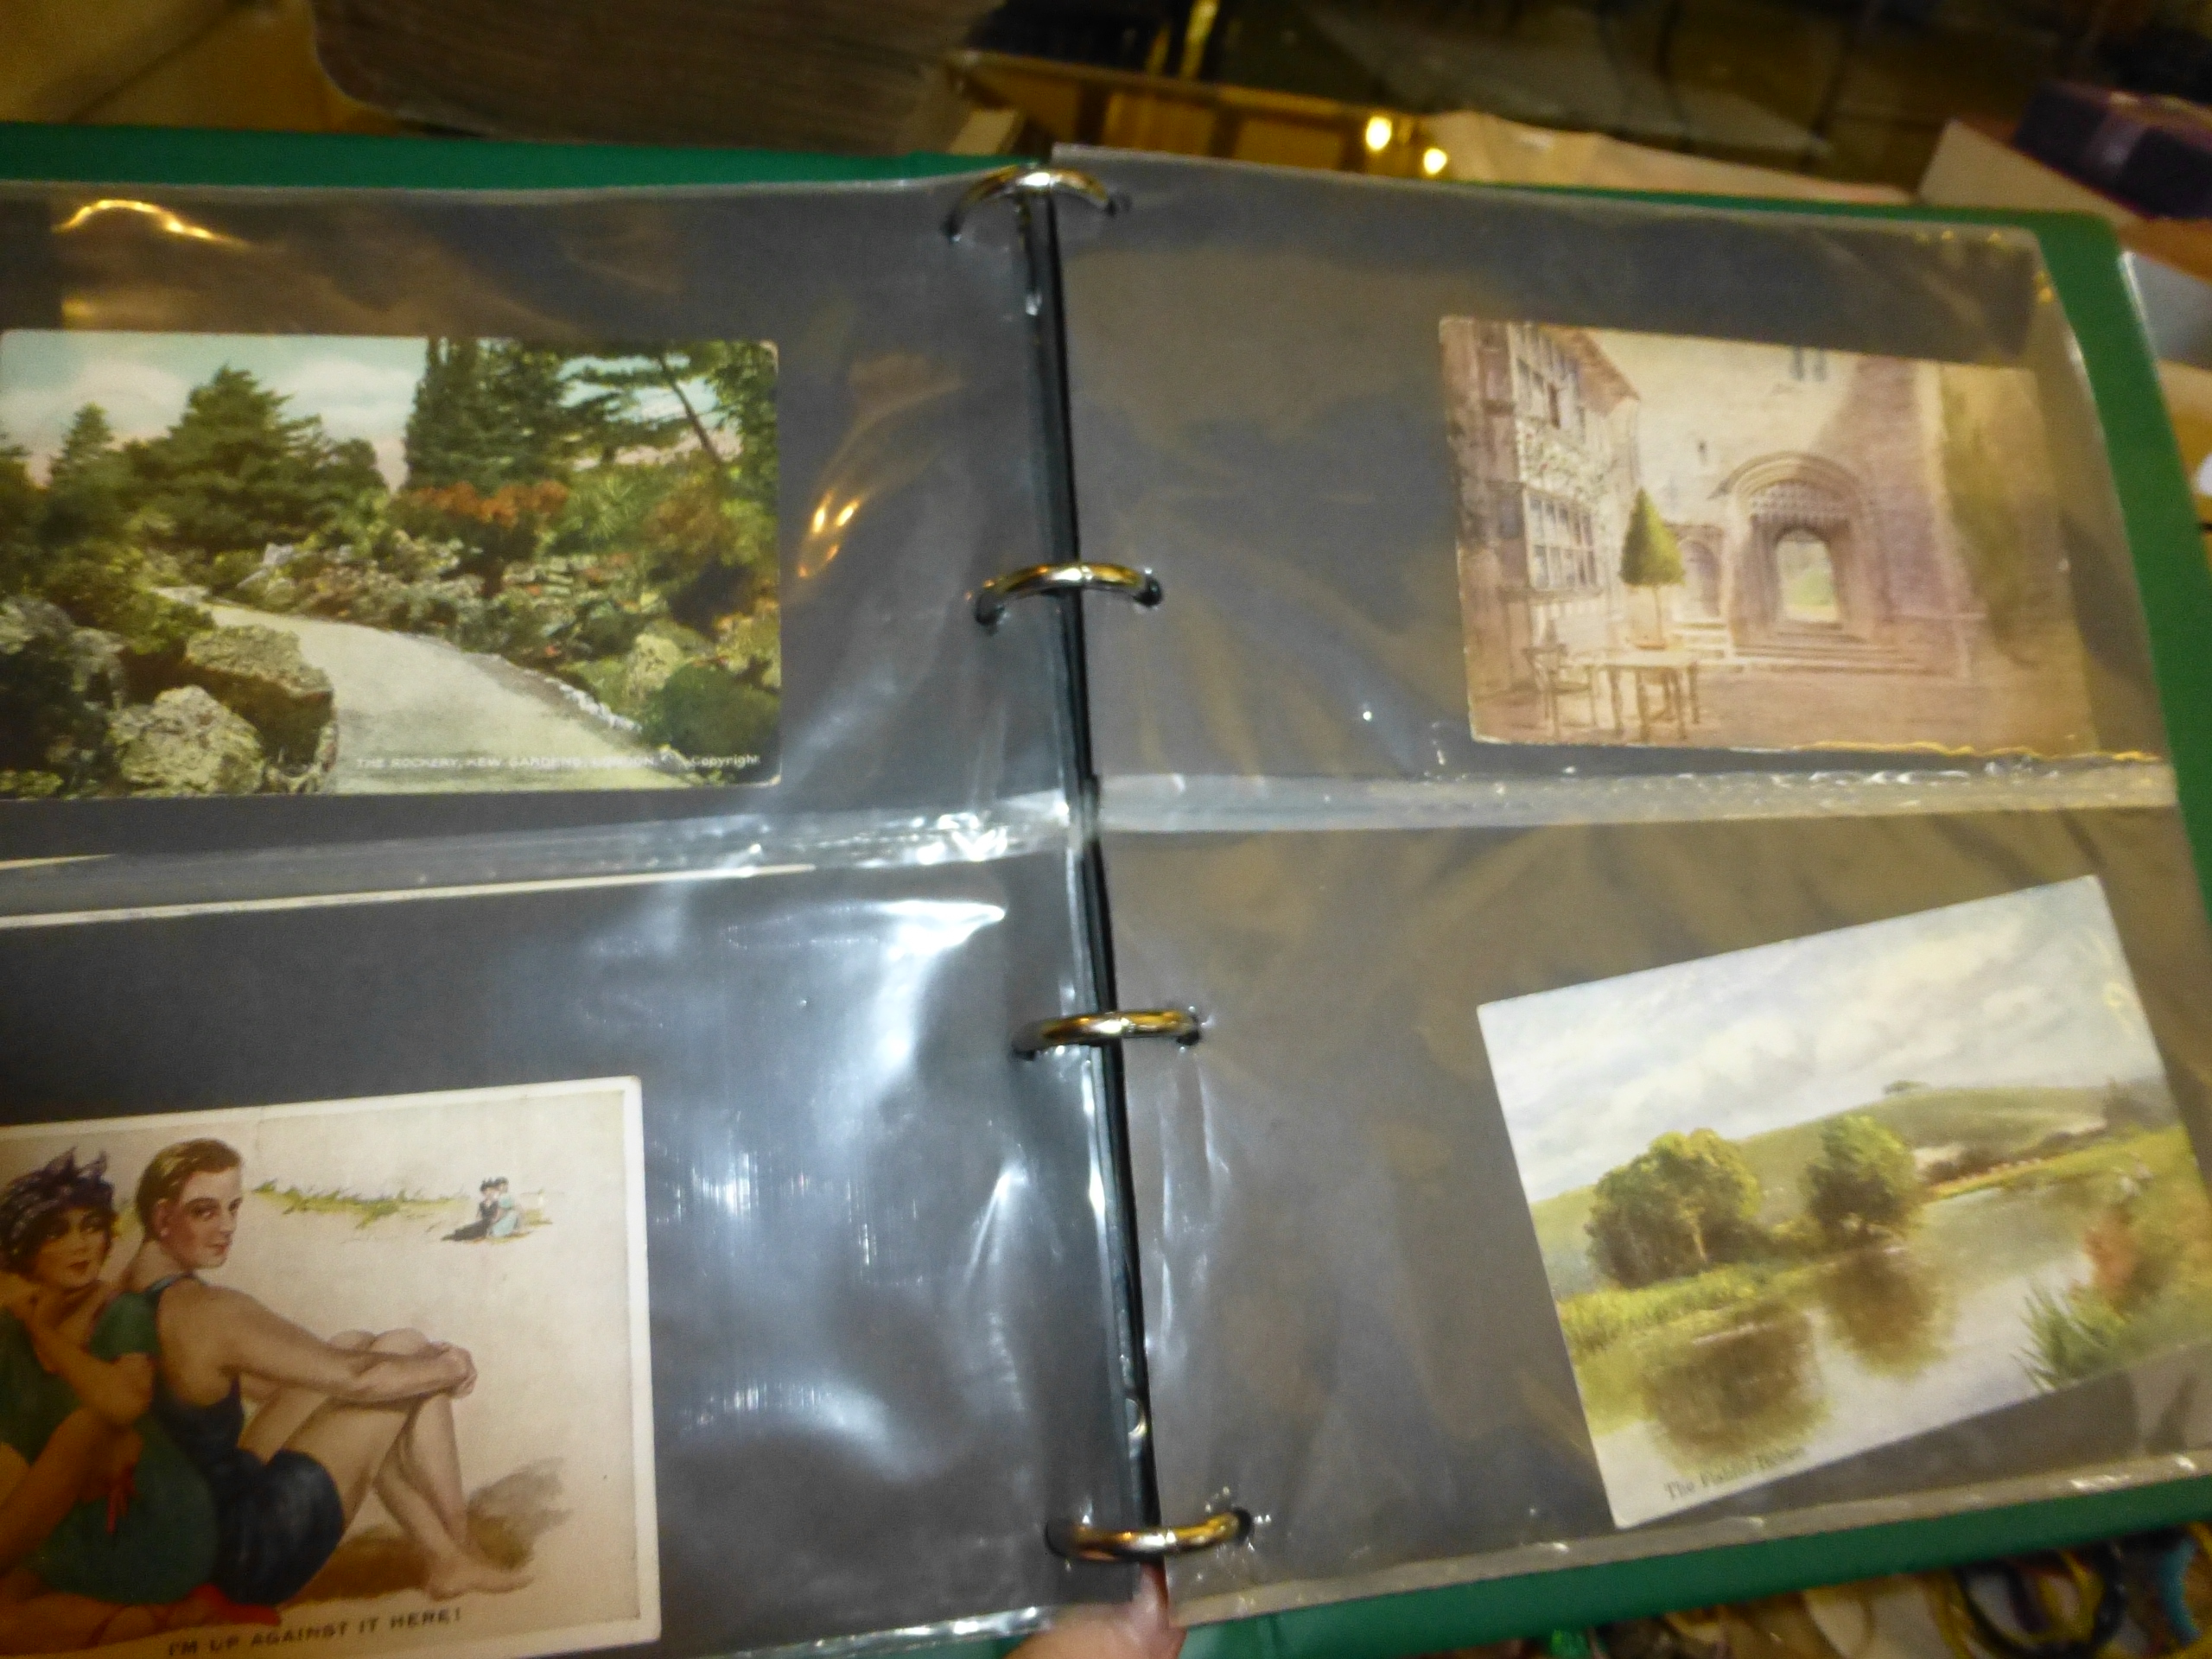 Two albums of vintage postcards